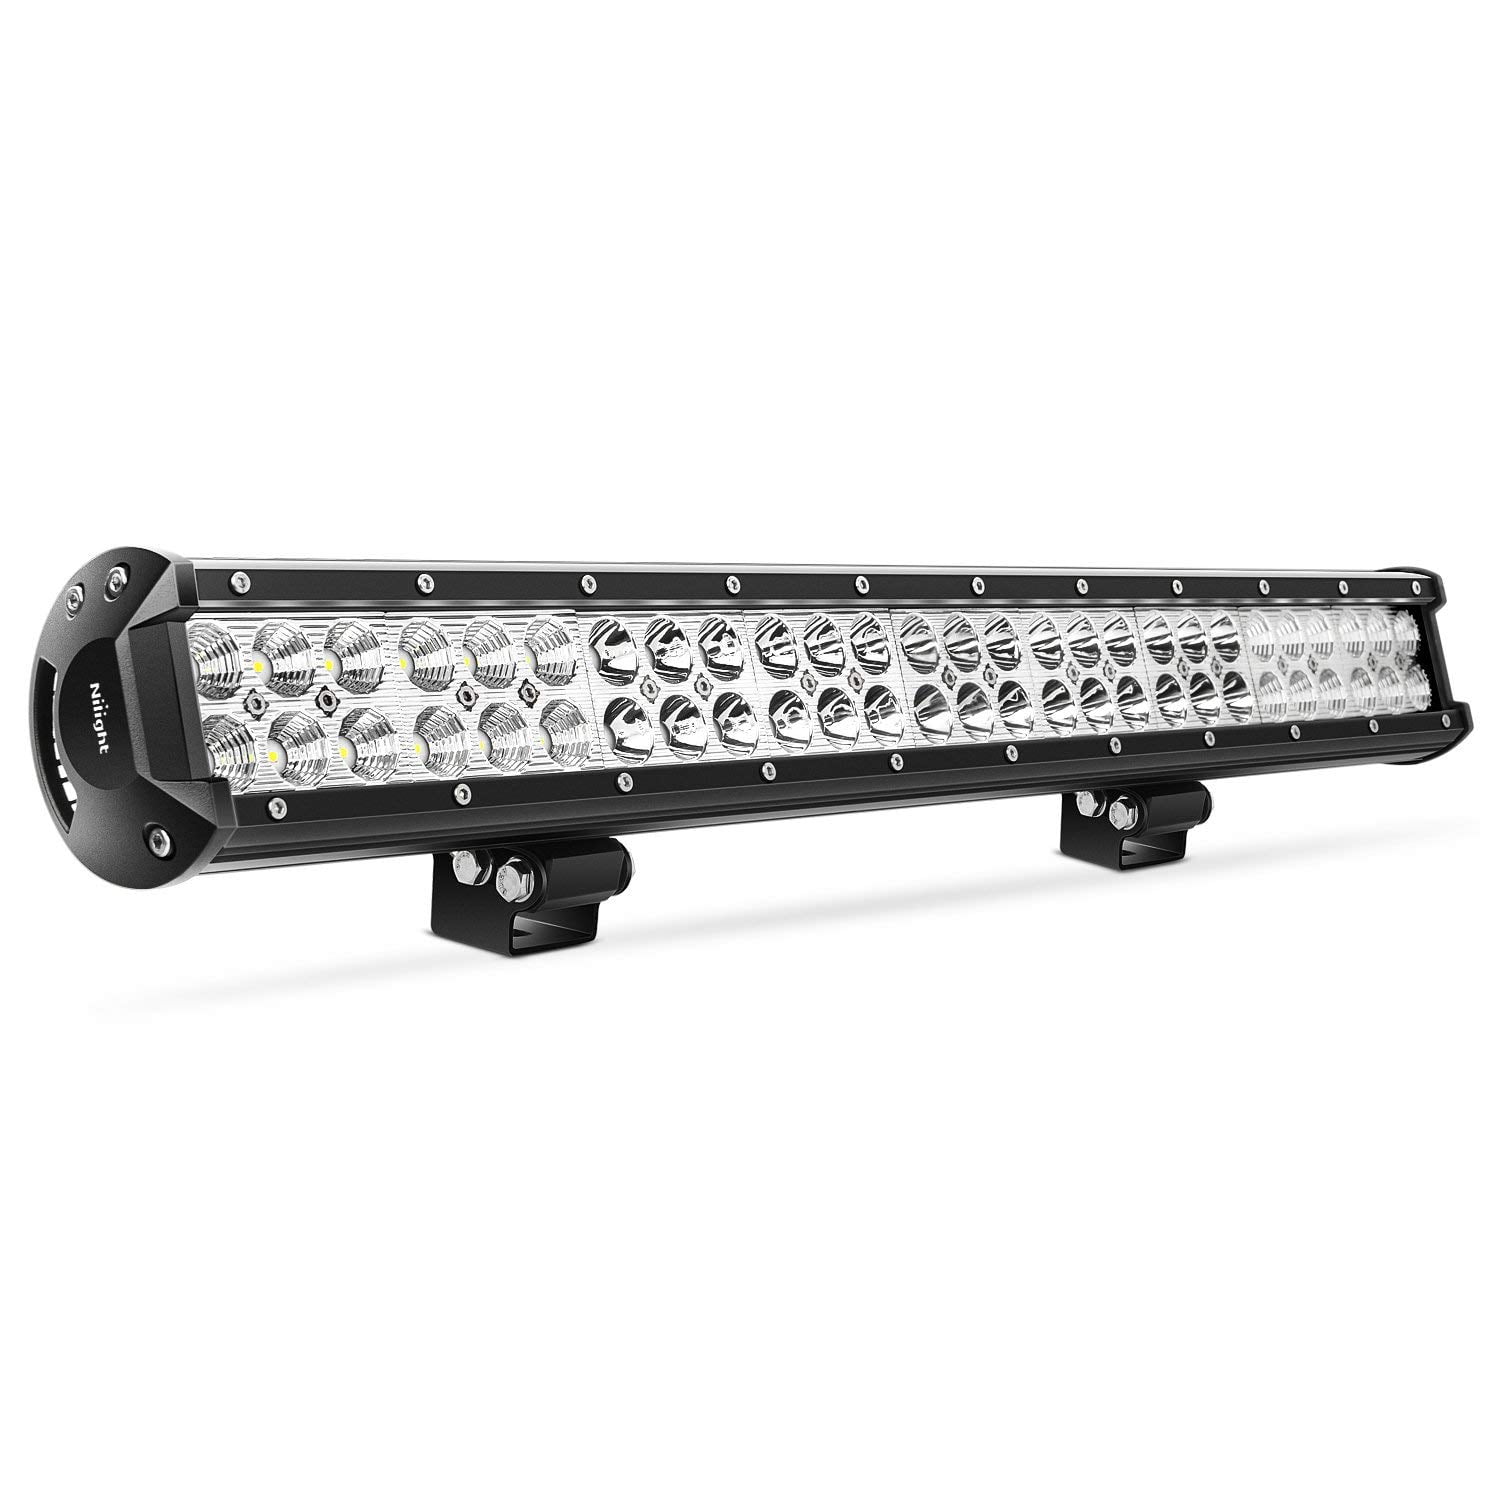 24"INCH 25inch 162W LED Work Light Bar Bumper FIT Ford ATV GMC Driving UTE 